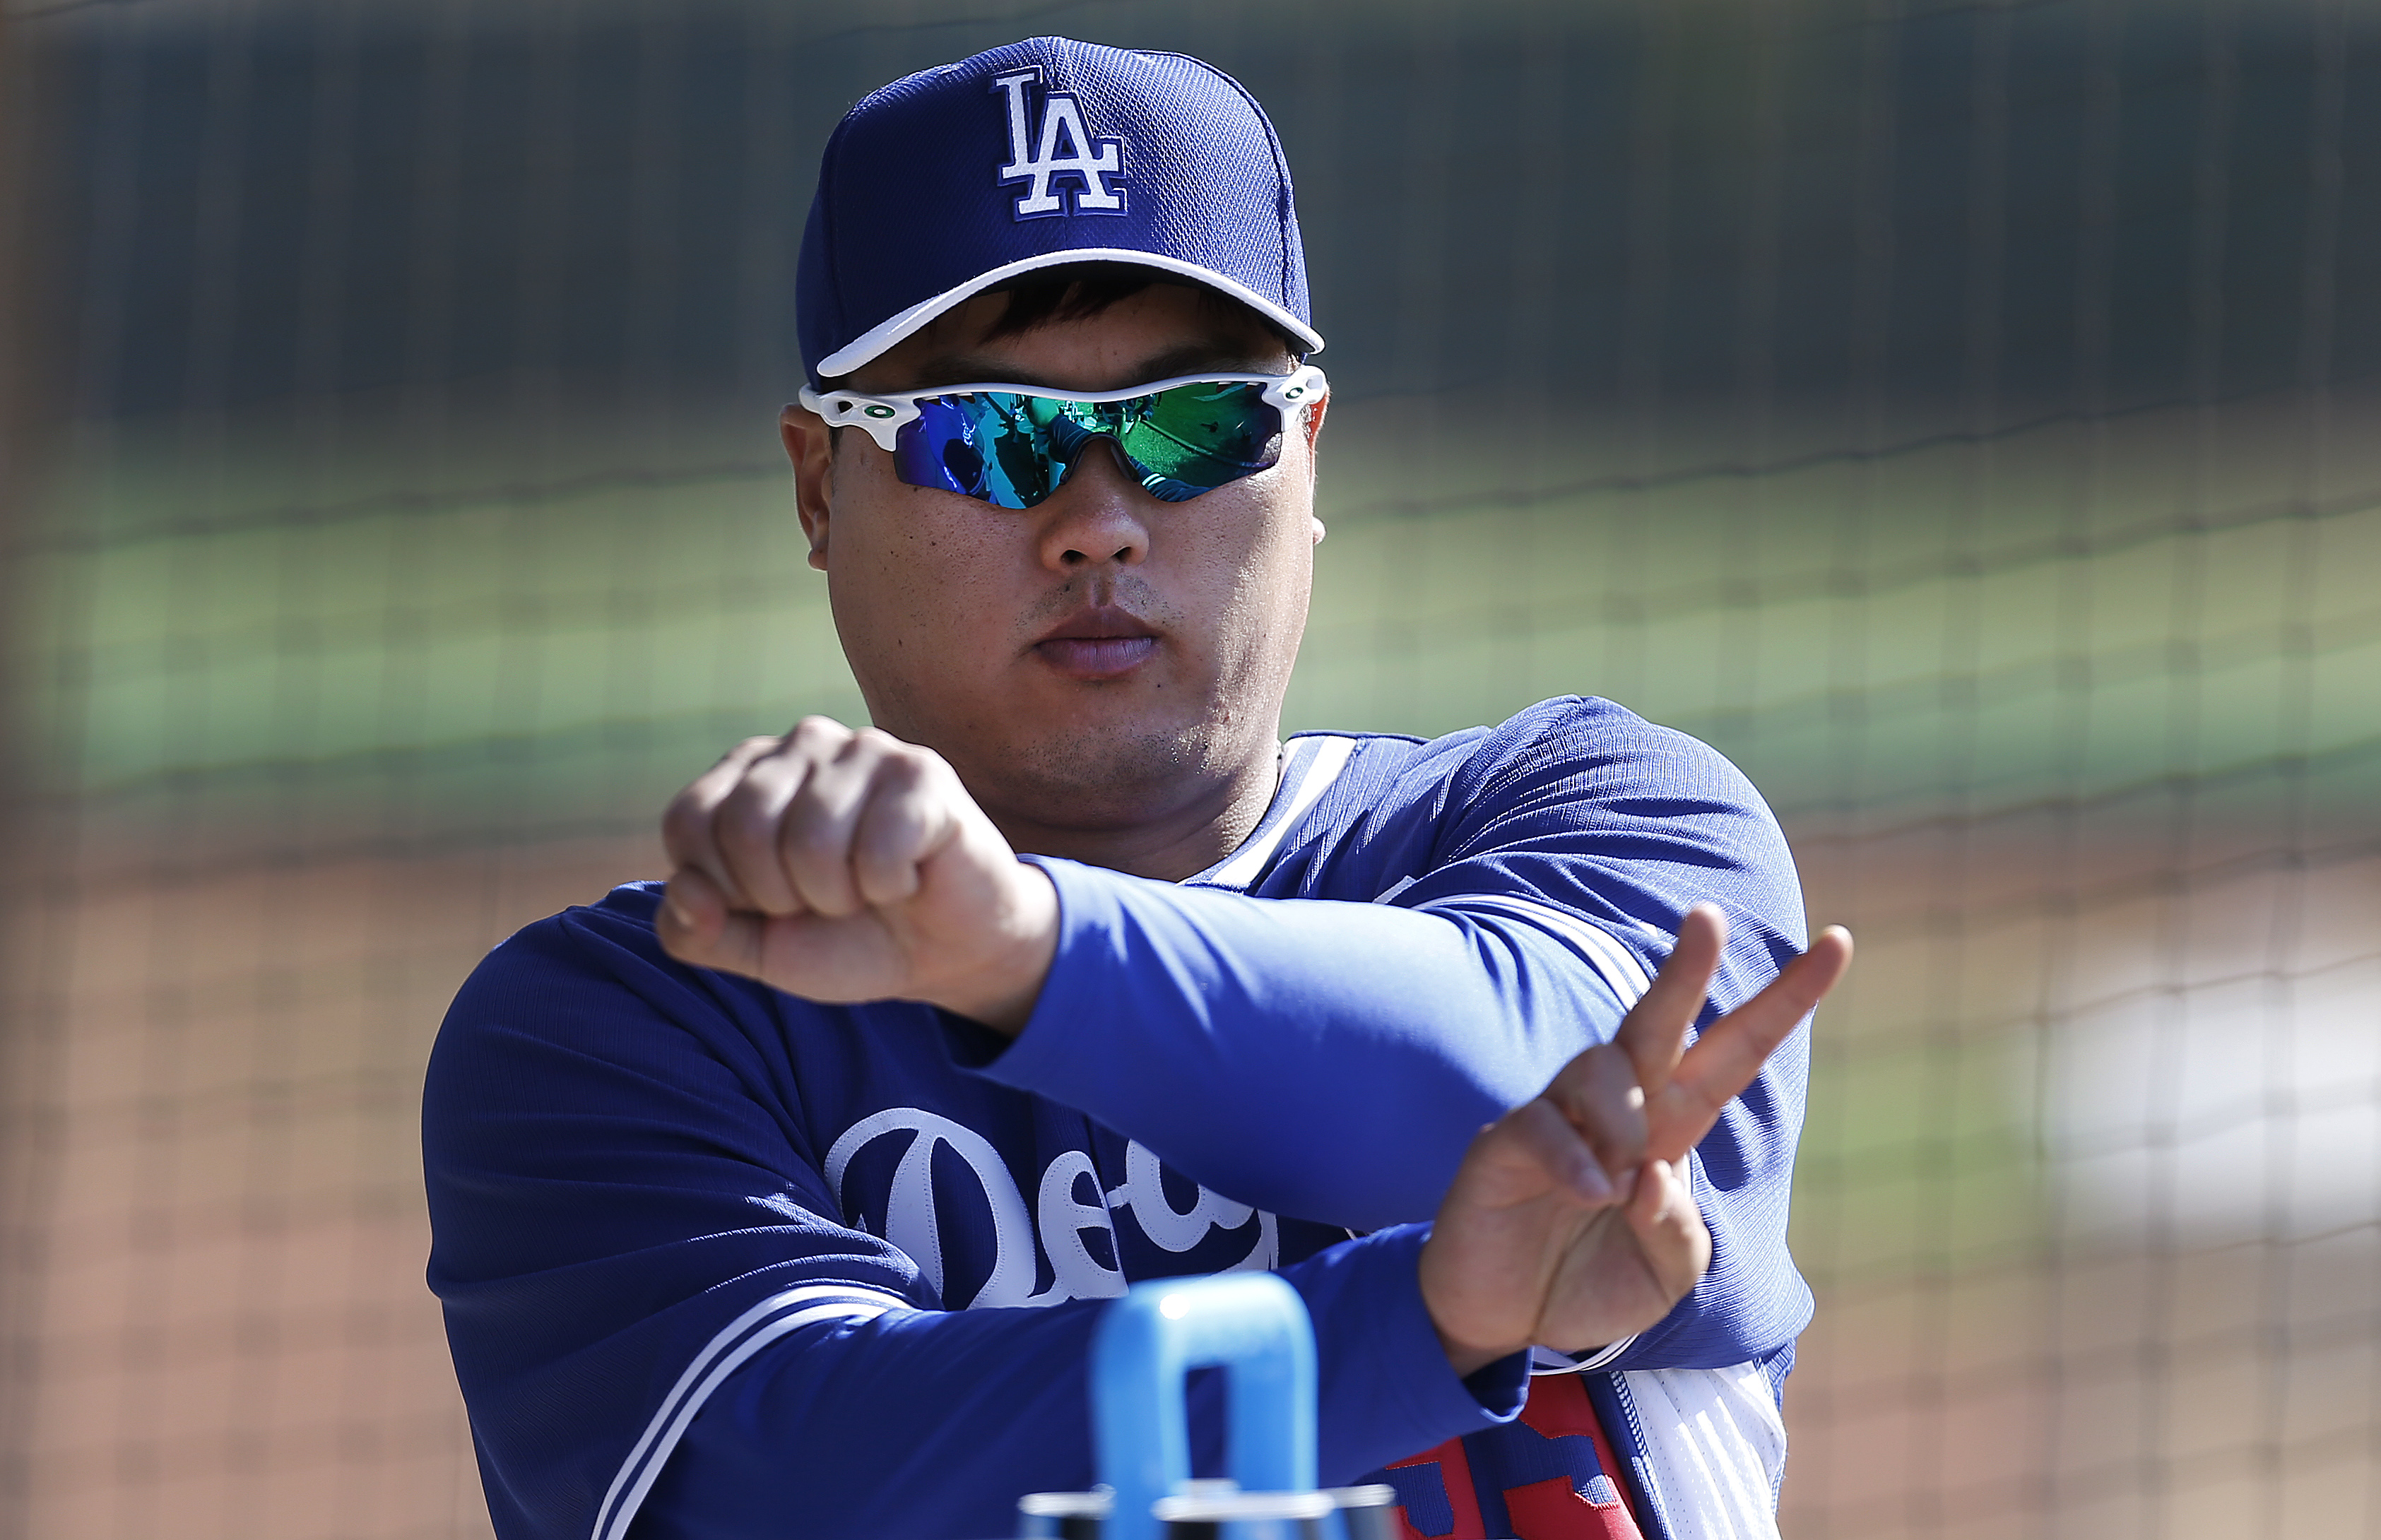 Los Angeles Dodgers' starting pitcher Ryu Hyun-jin began throwing for the first time on Tuesday following his season-ending shoulder surgery back in May. (AP Photo)